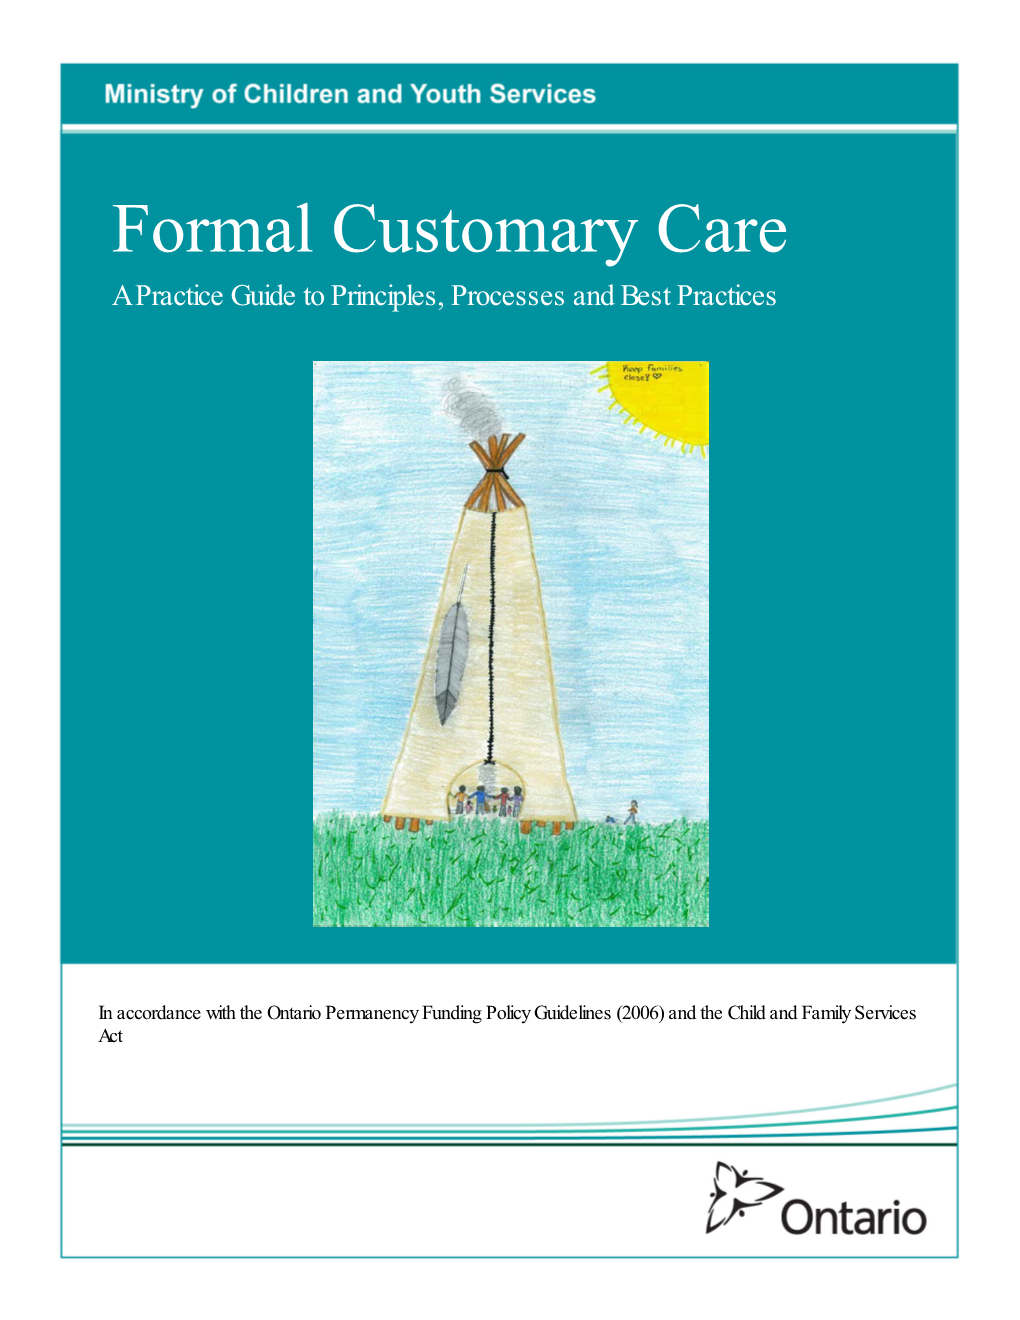 Formal Customary Care a Practice Guide to Principles, Processes and Best Practices